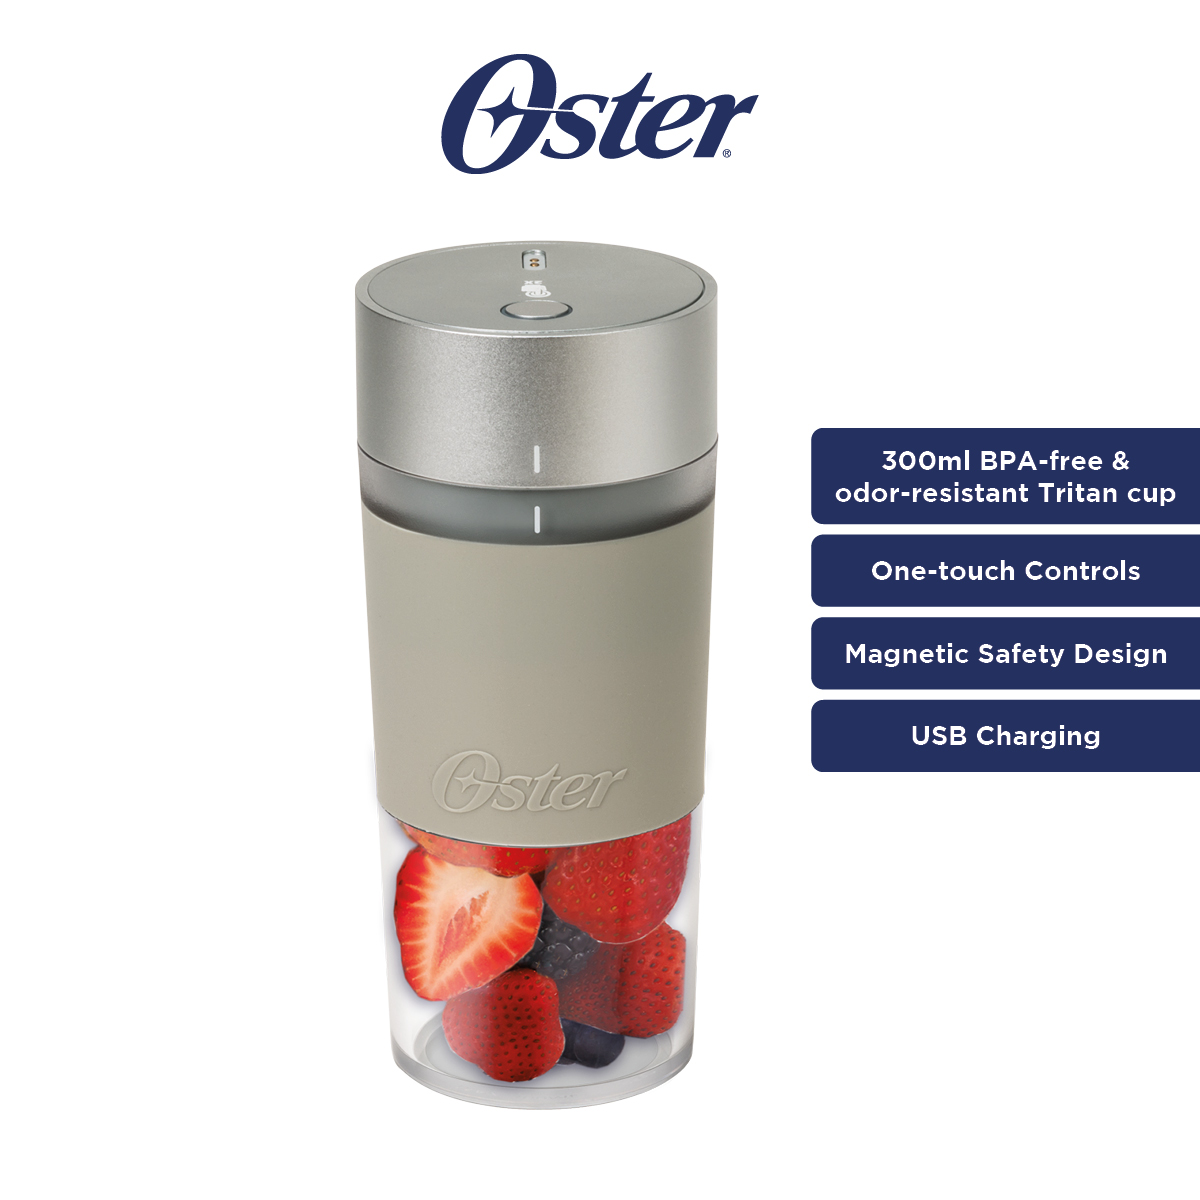 Oster - All is well if you have rice and Oster® rice cooker makes it  steaming hot for you. Buy at   #OsterPhilippines #OsterHomecooking #OsterRiceCooker